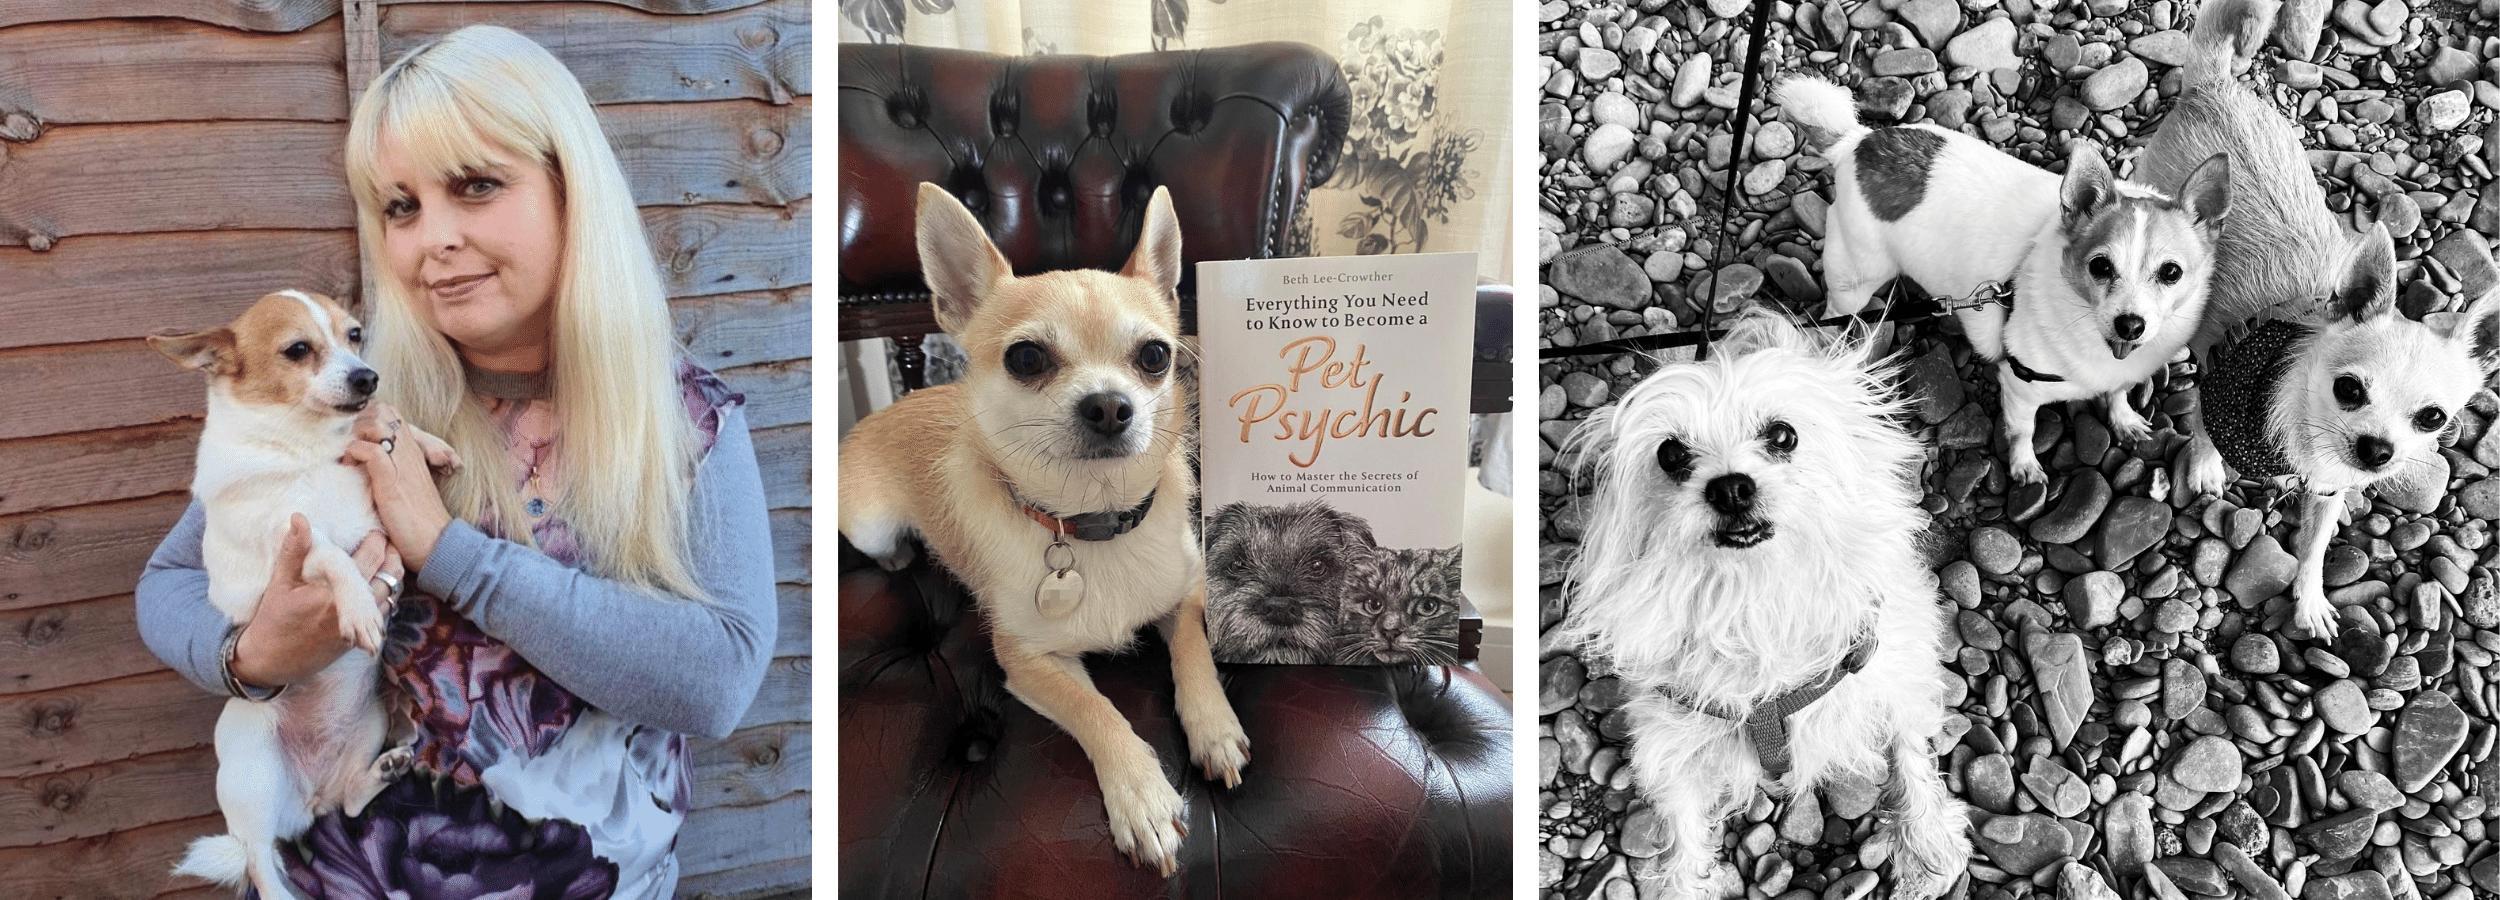 Pet Psychic Beth Lee-Crowther with her dogs and book